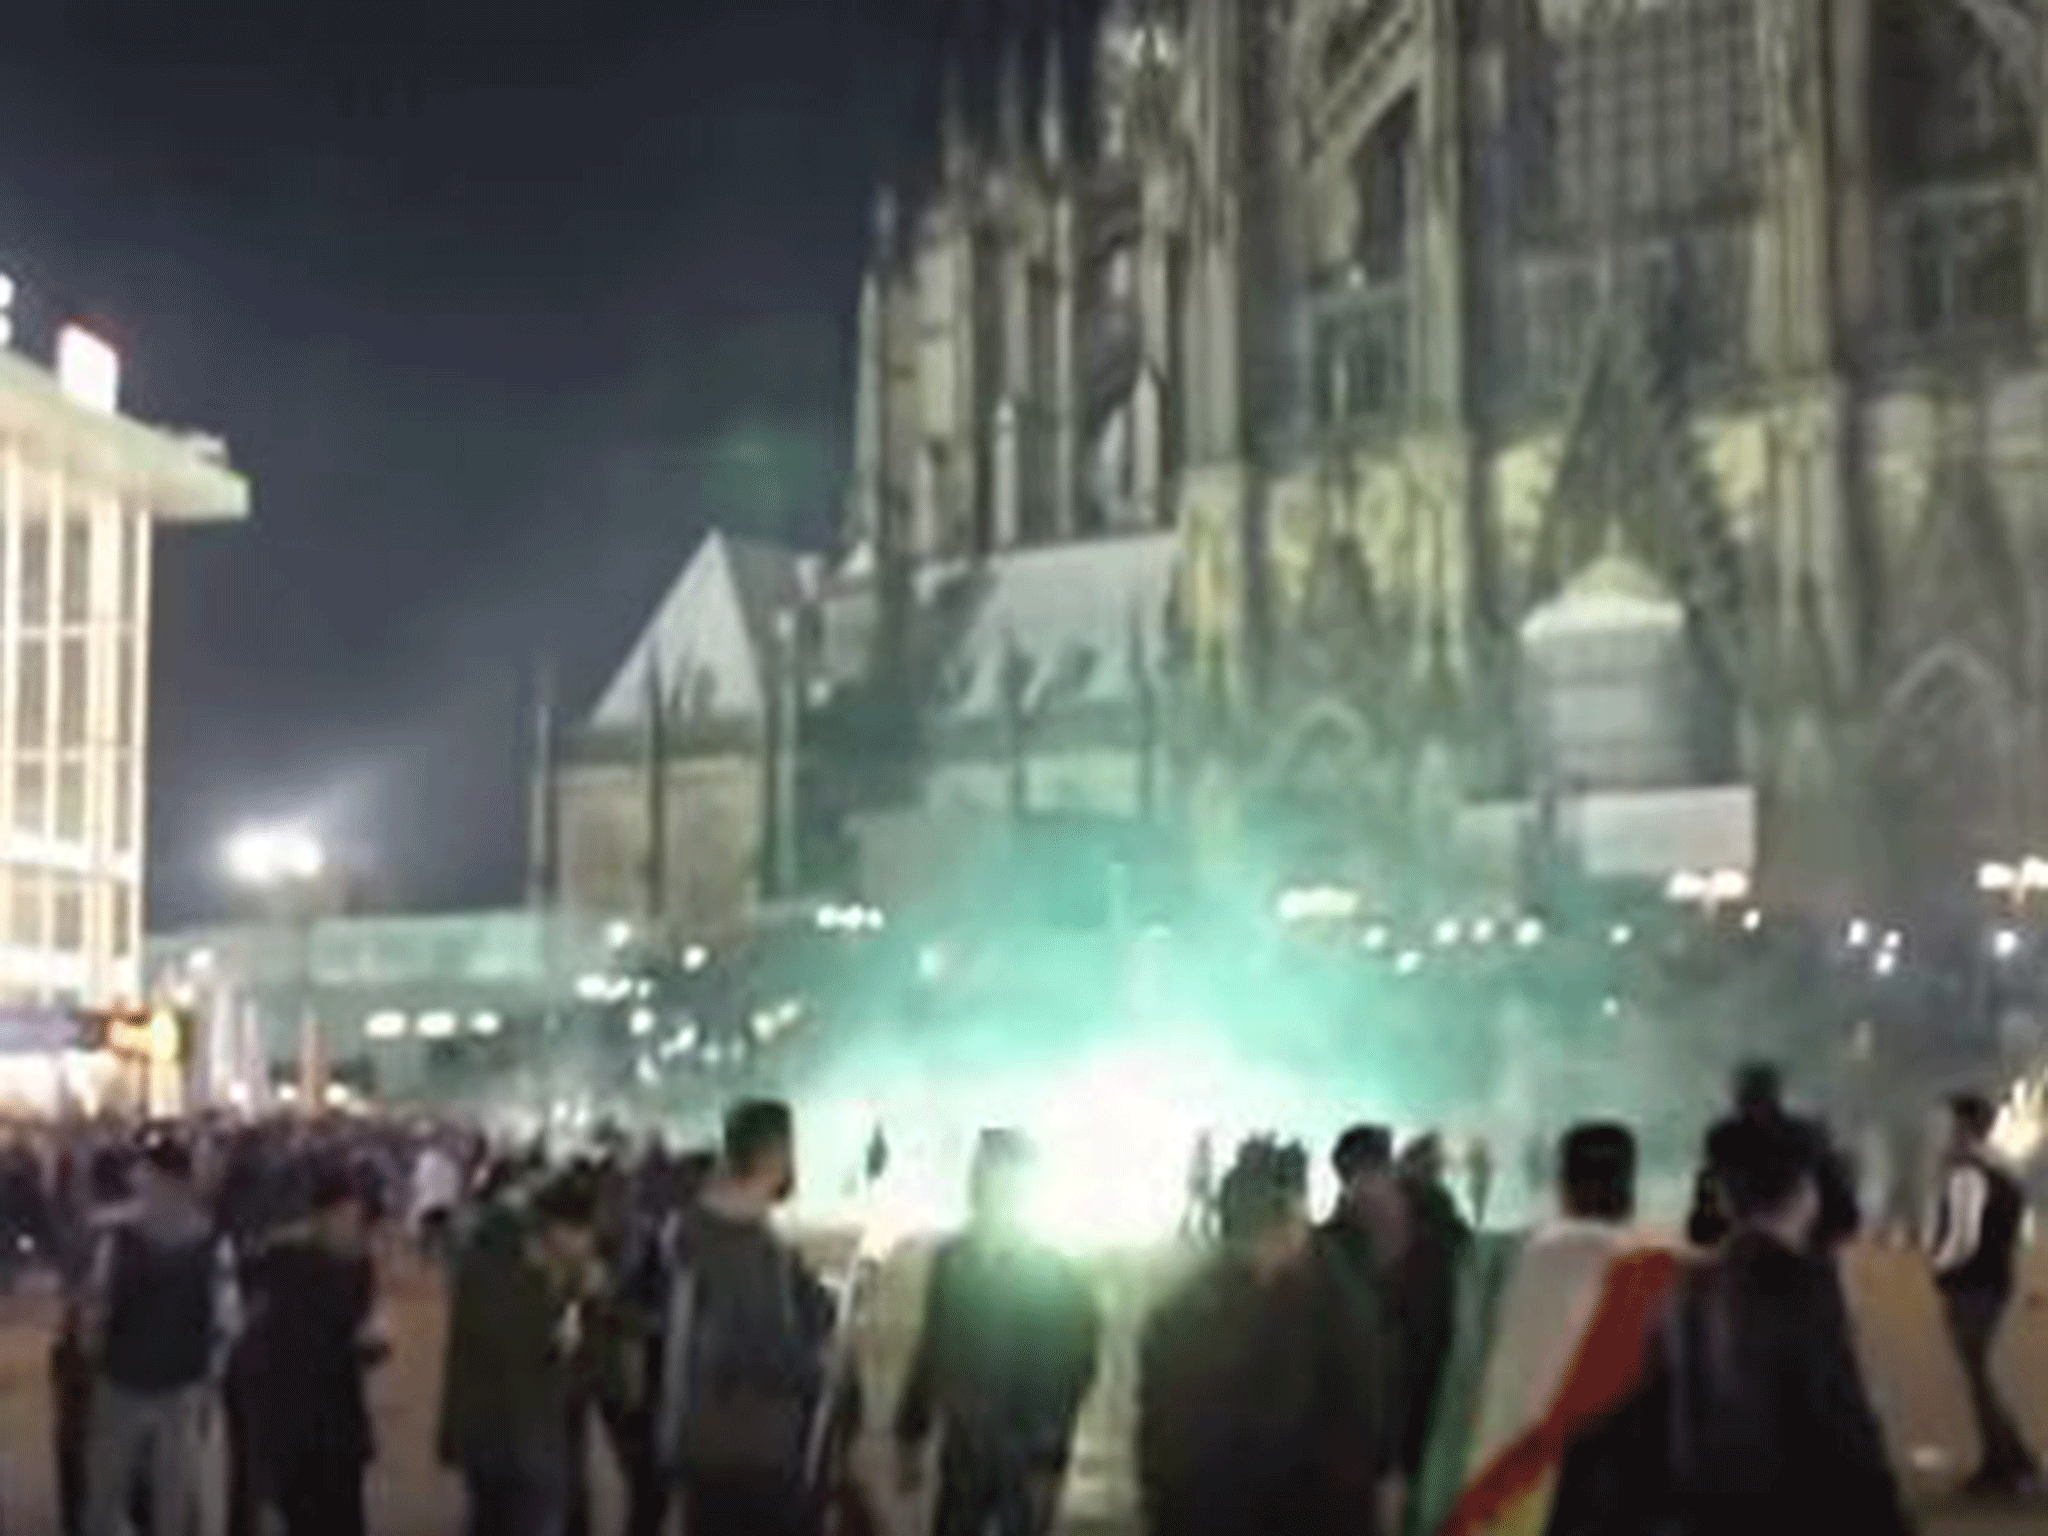 The crowd of men outside the cathedral and main train station in Cologne, with firecrackers being let off